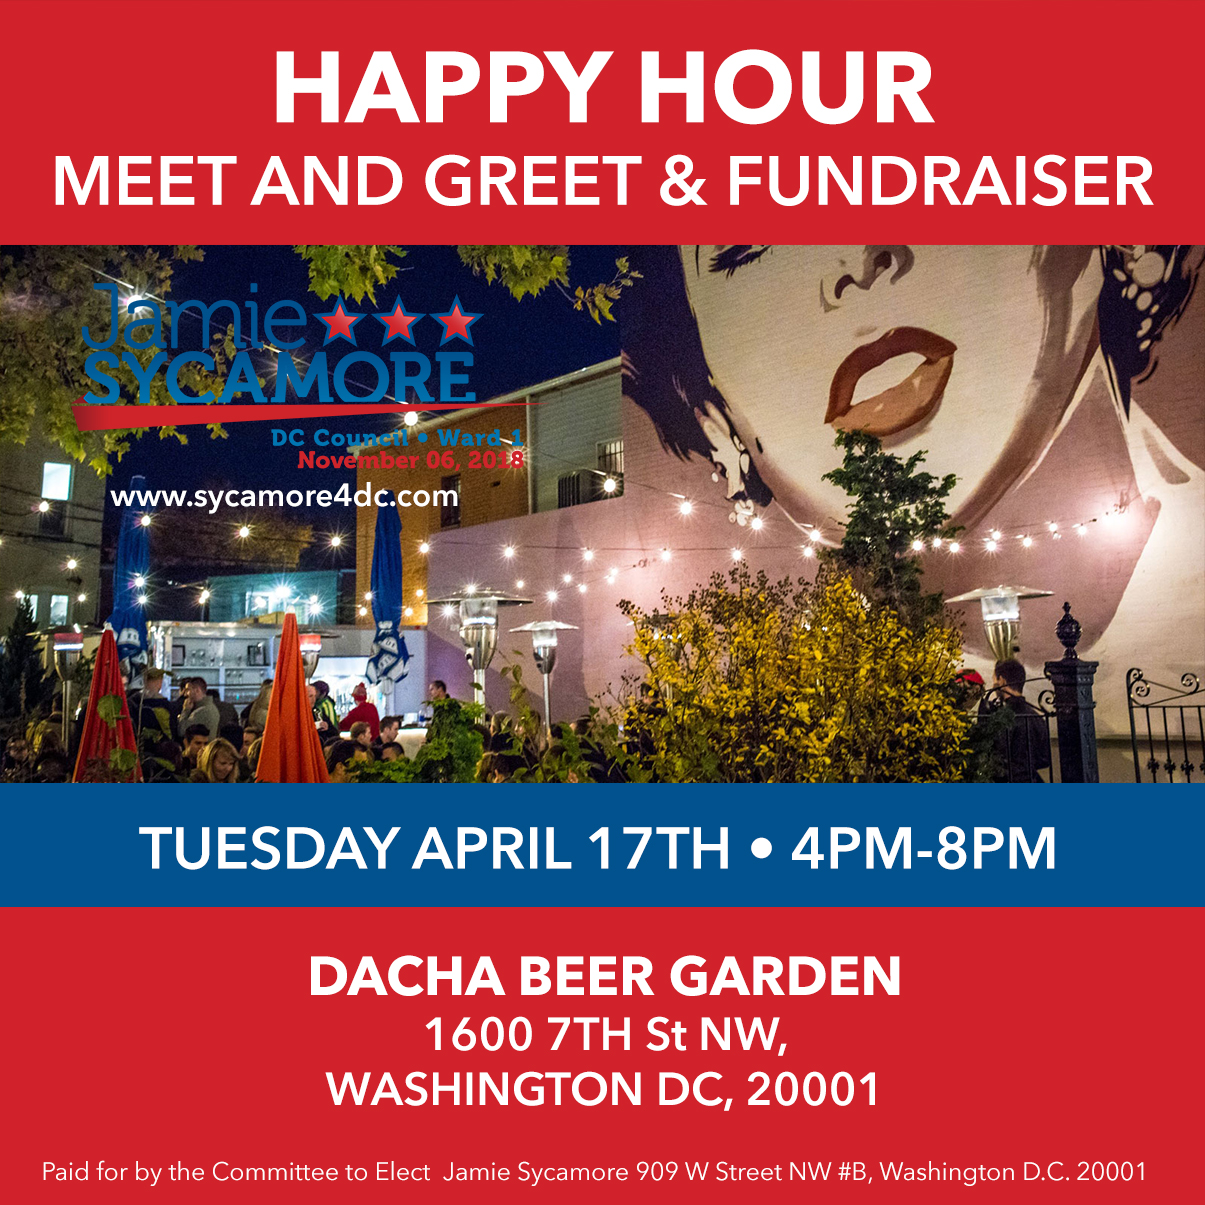 Dacha- Beer Chat Fundraiser Sycamore For Dc